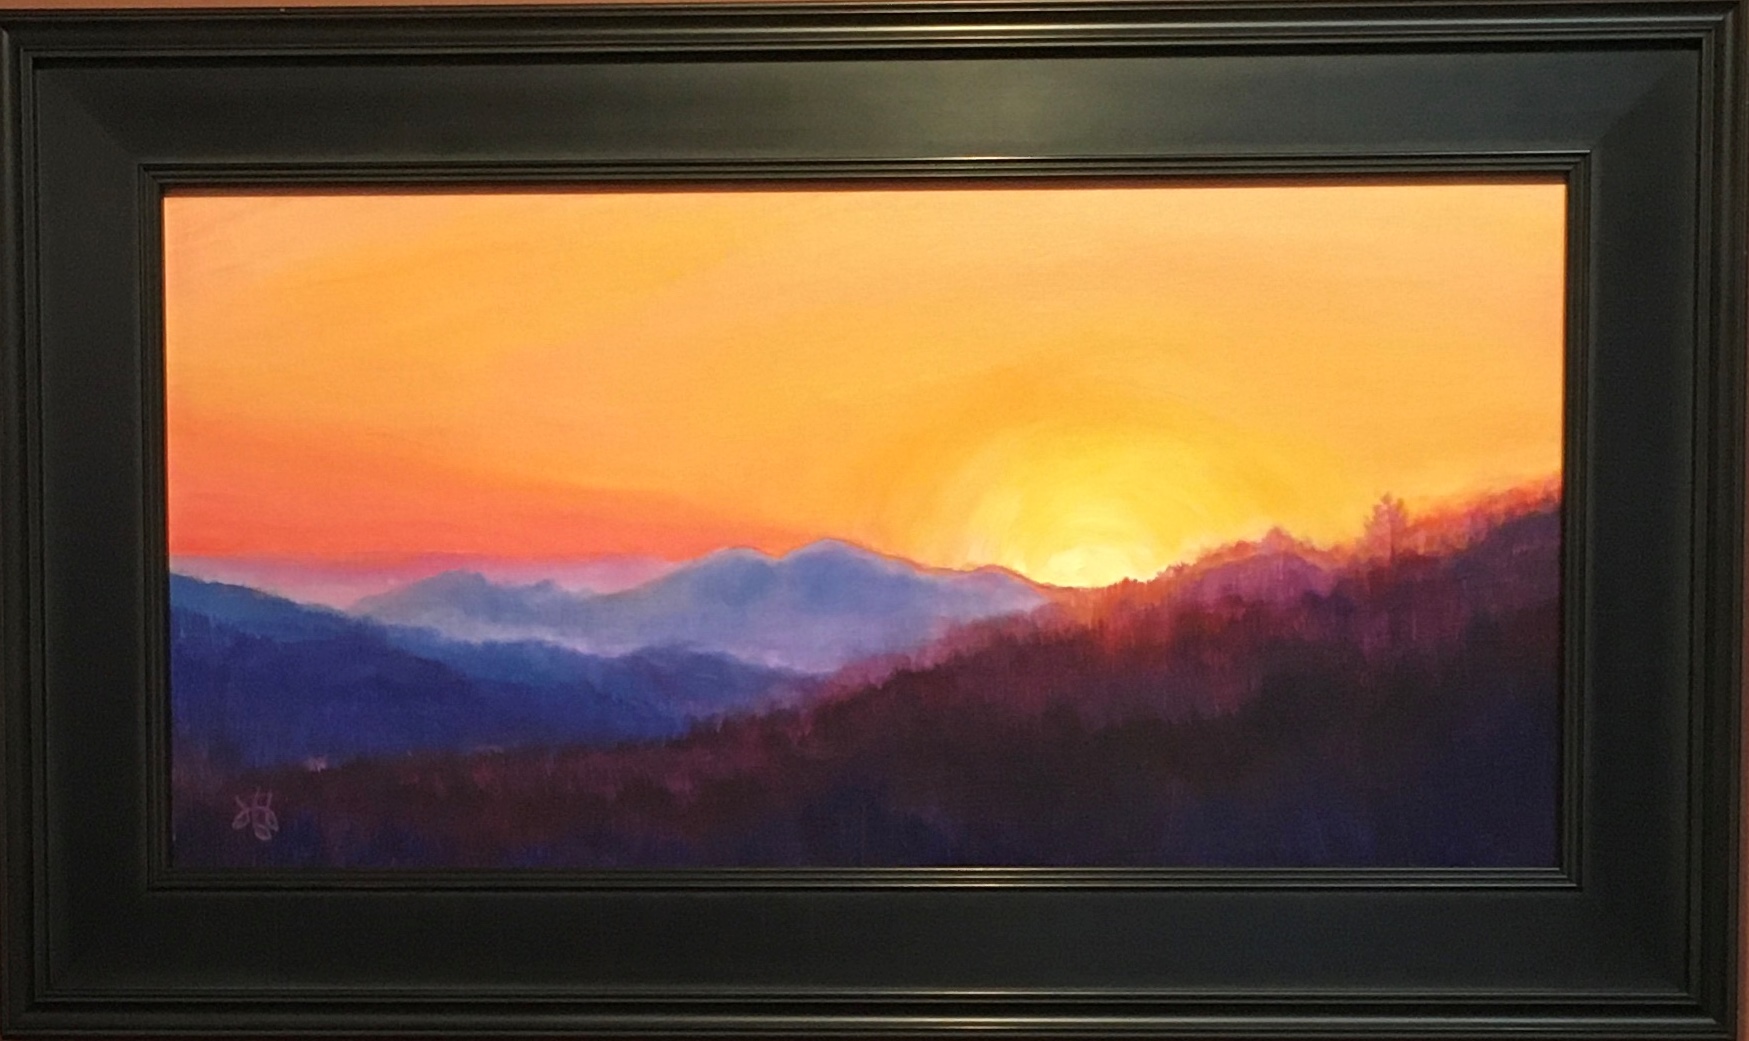 oil painting of yellow and orange sunset sky over purple and blue mountains